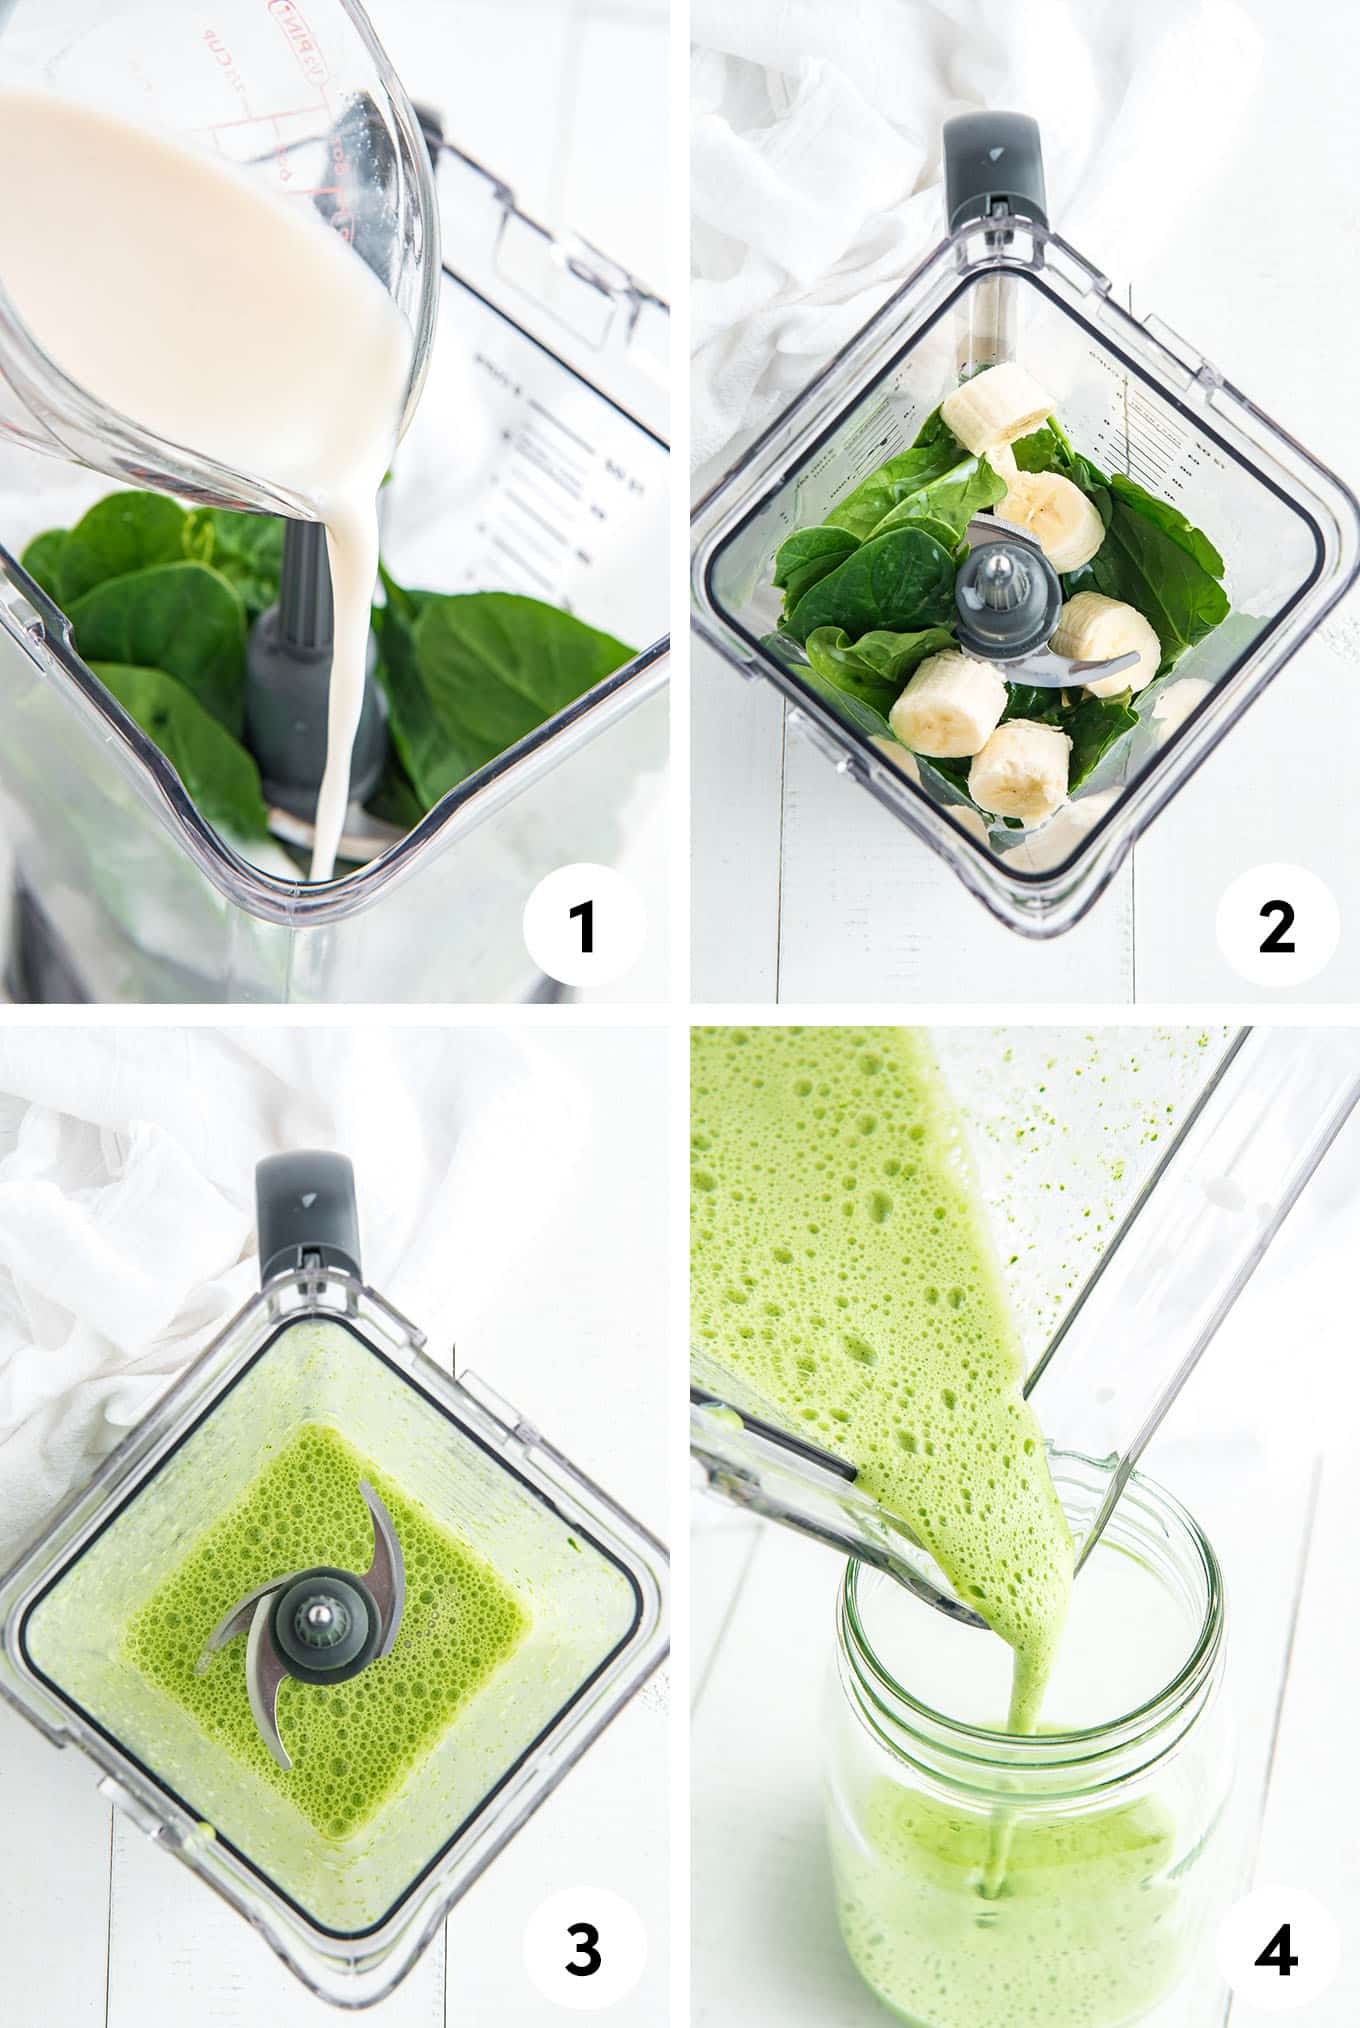 Collage of images showing the steps for making a spinach smoothie.